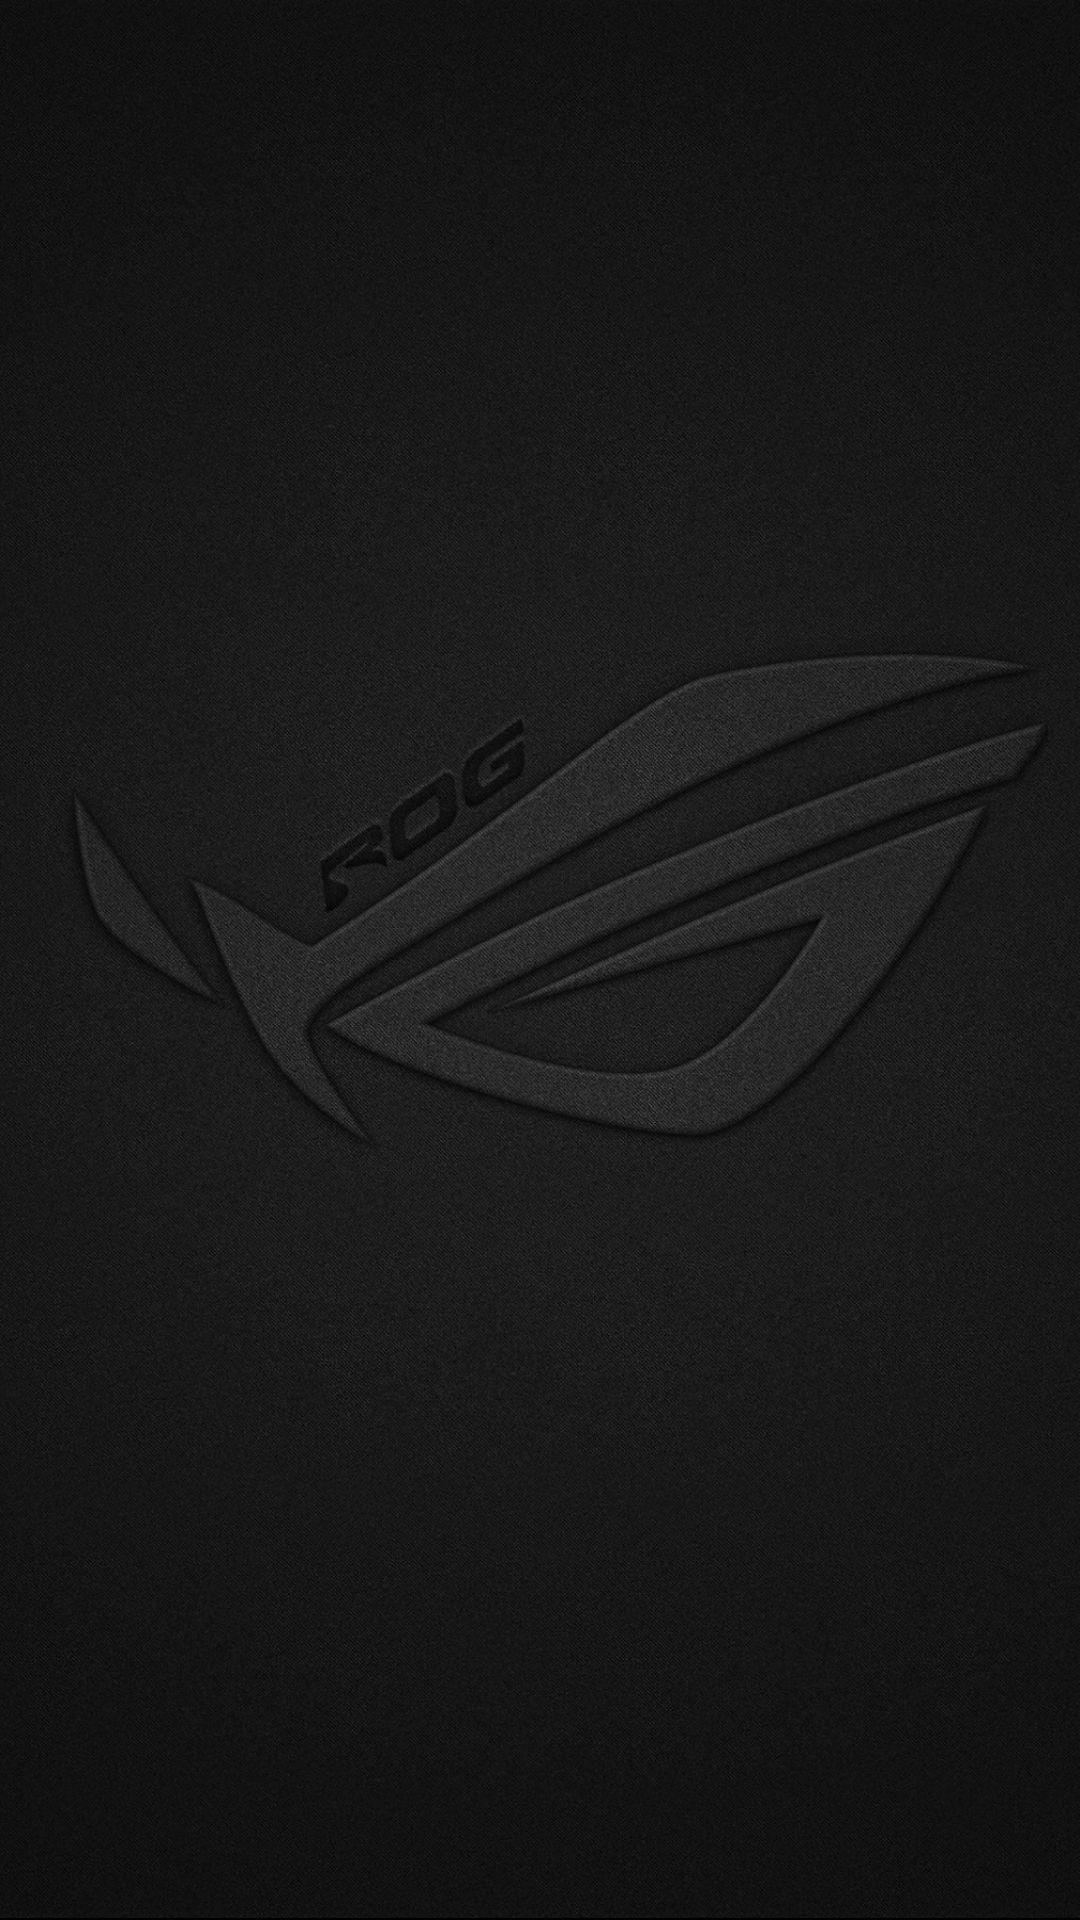 Asus Iphone Wallpapers Top Free Asus Iphone Backgrounds Wallpaperaccess